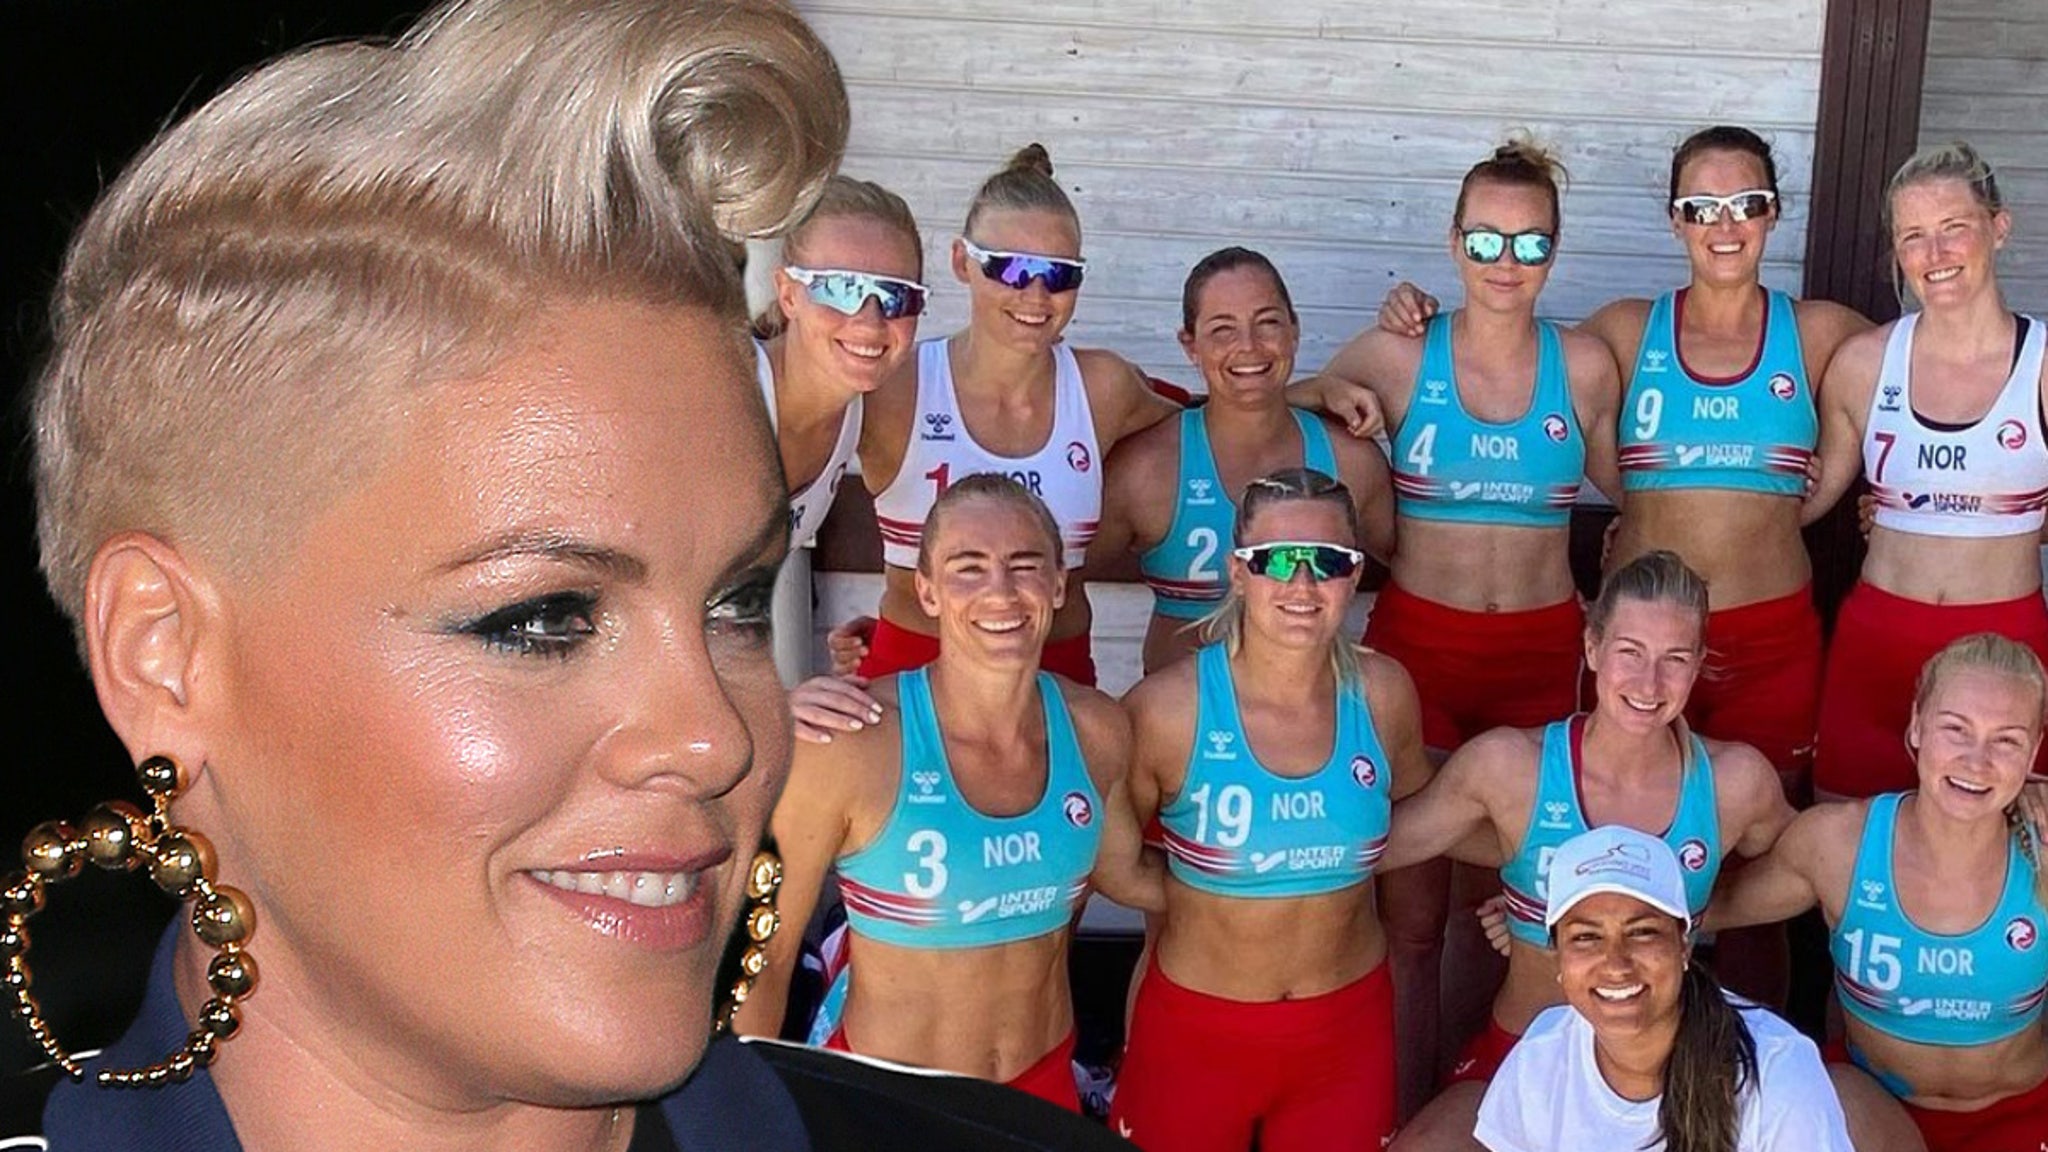 P!nk Says She'll Pay Norwegian Women's Handball Fines Over 'Sexist Rules'